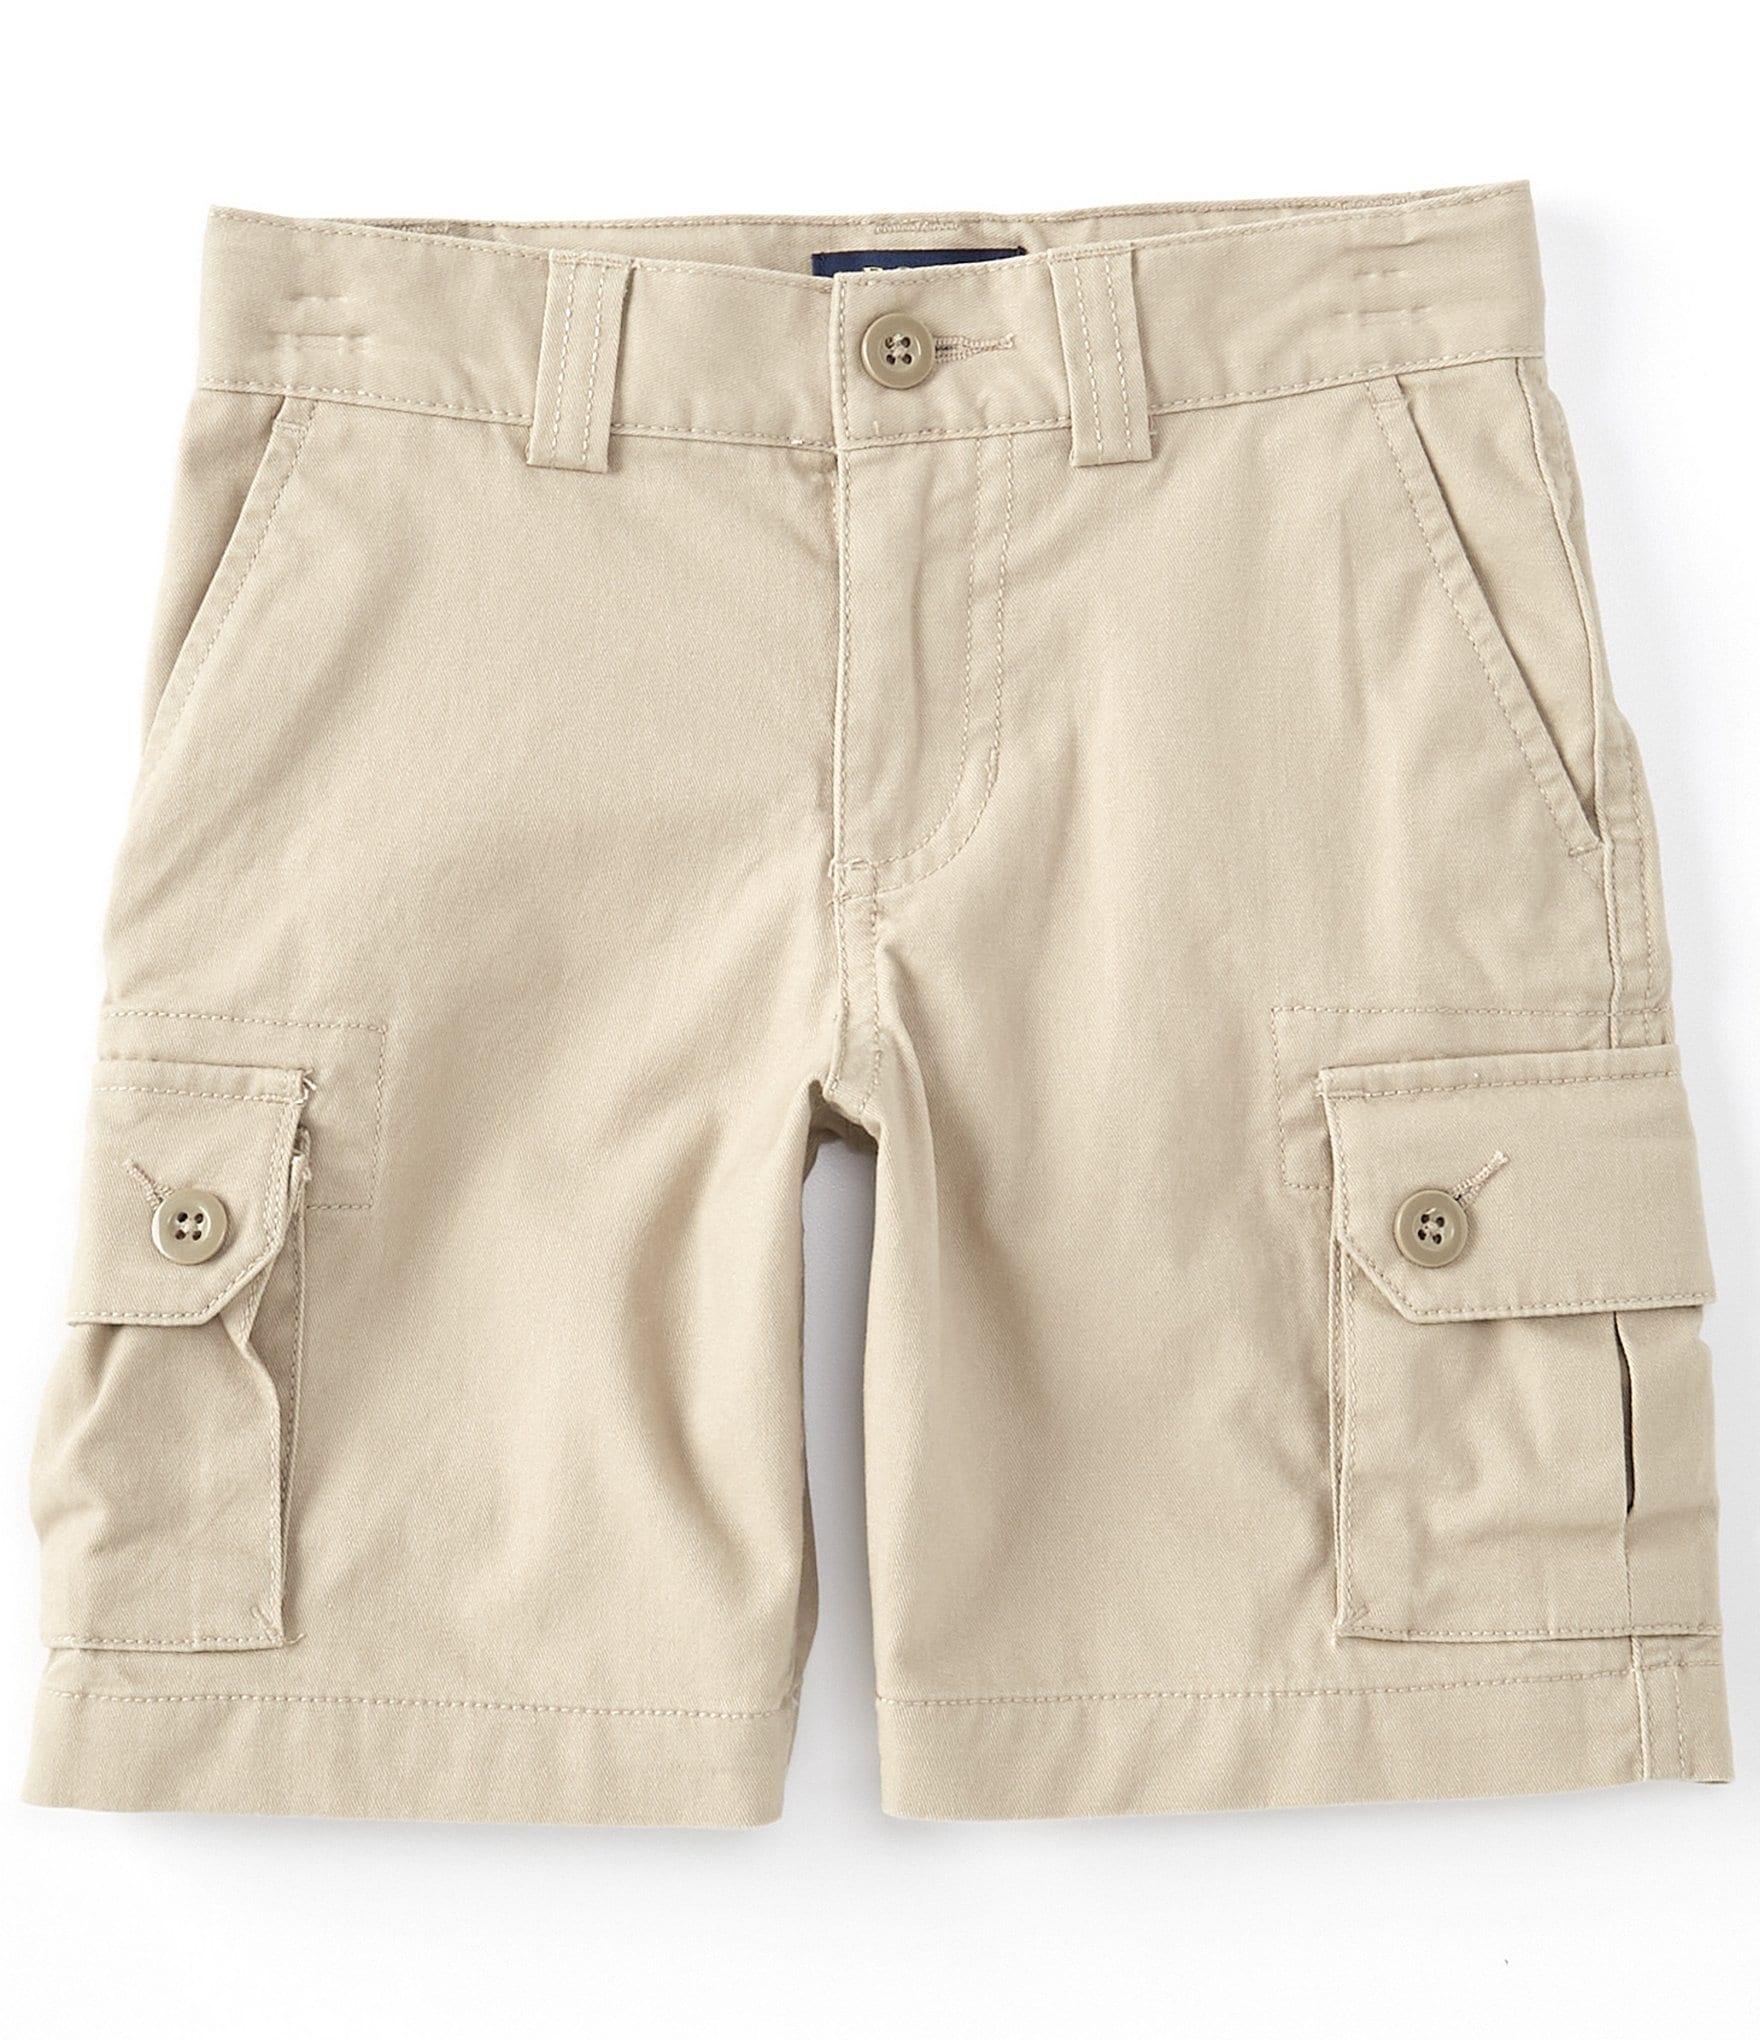 Boys Green Checked Combat Cargo Button Pocket Cotton Shorts.Sizes:3-13years